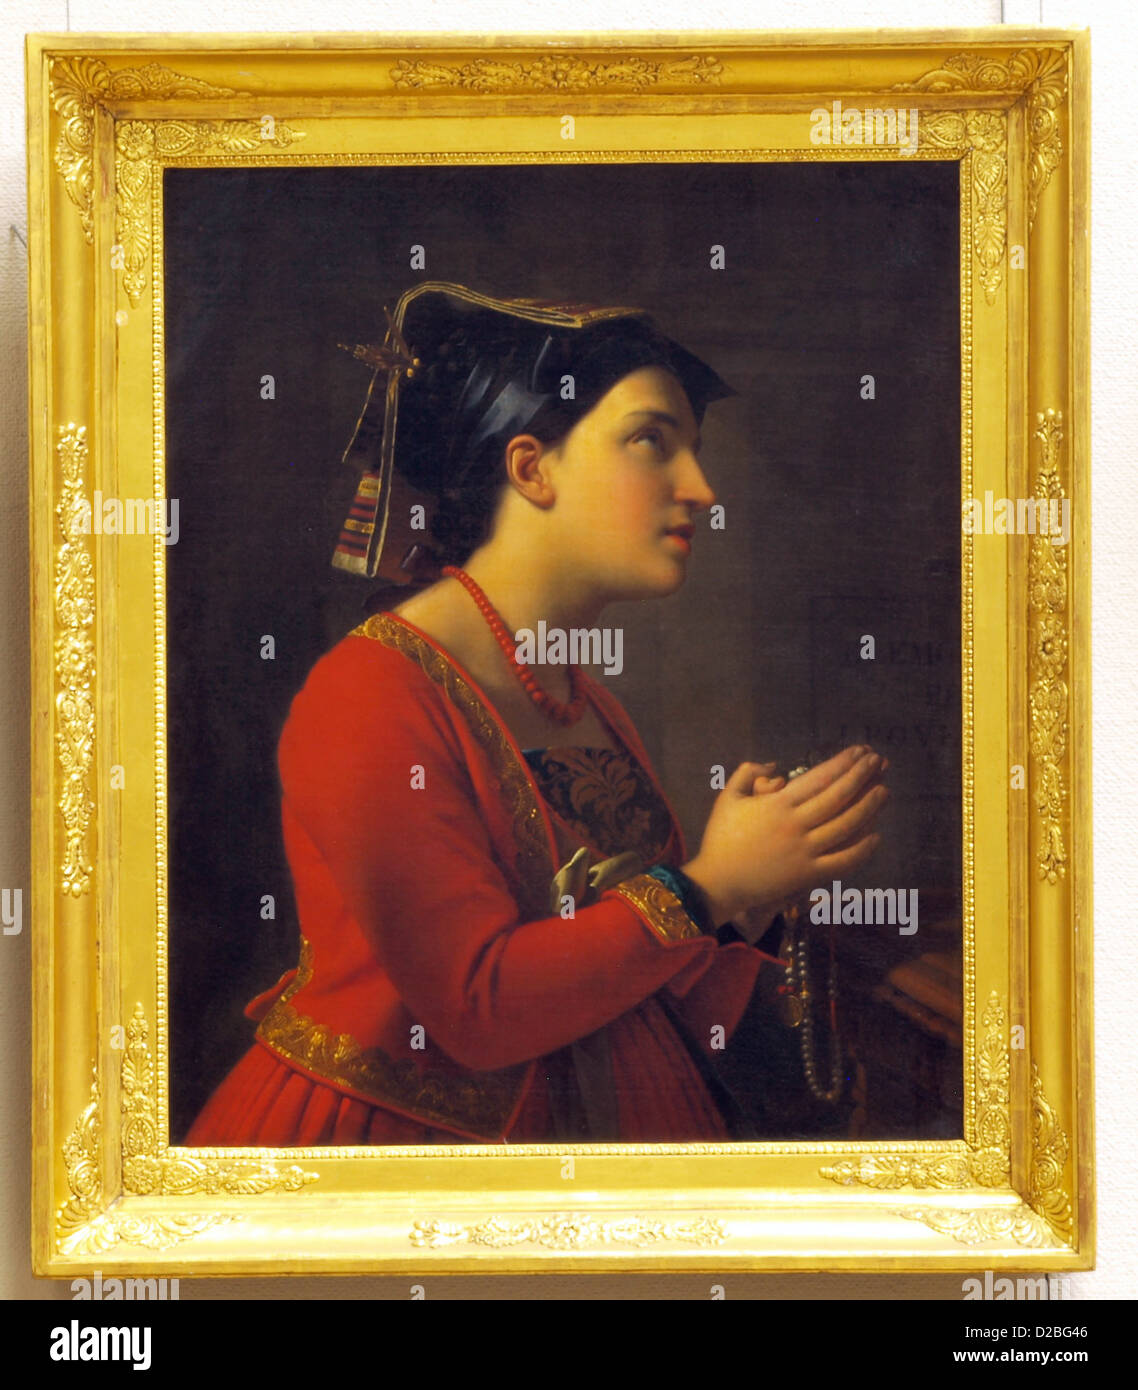 Calisch Moritz (1819-1870), Italian Young woman in prayer, 1850, Oil on canvas Stock Photo